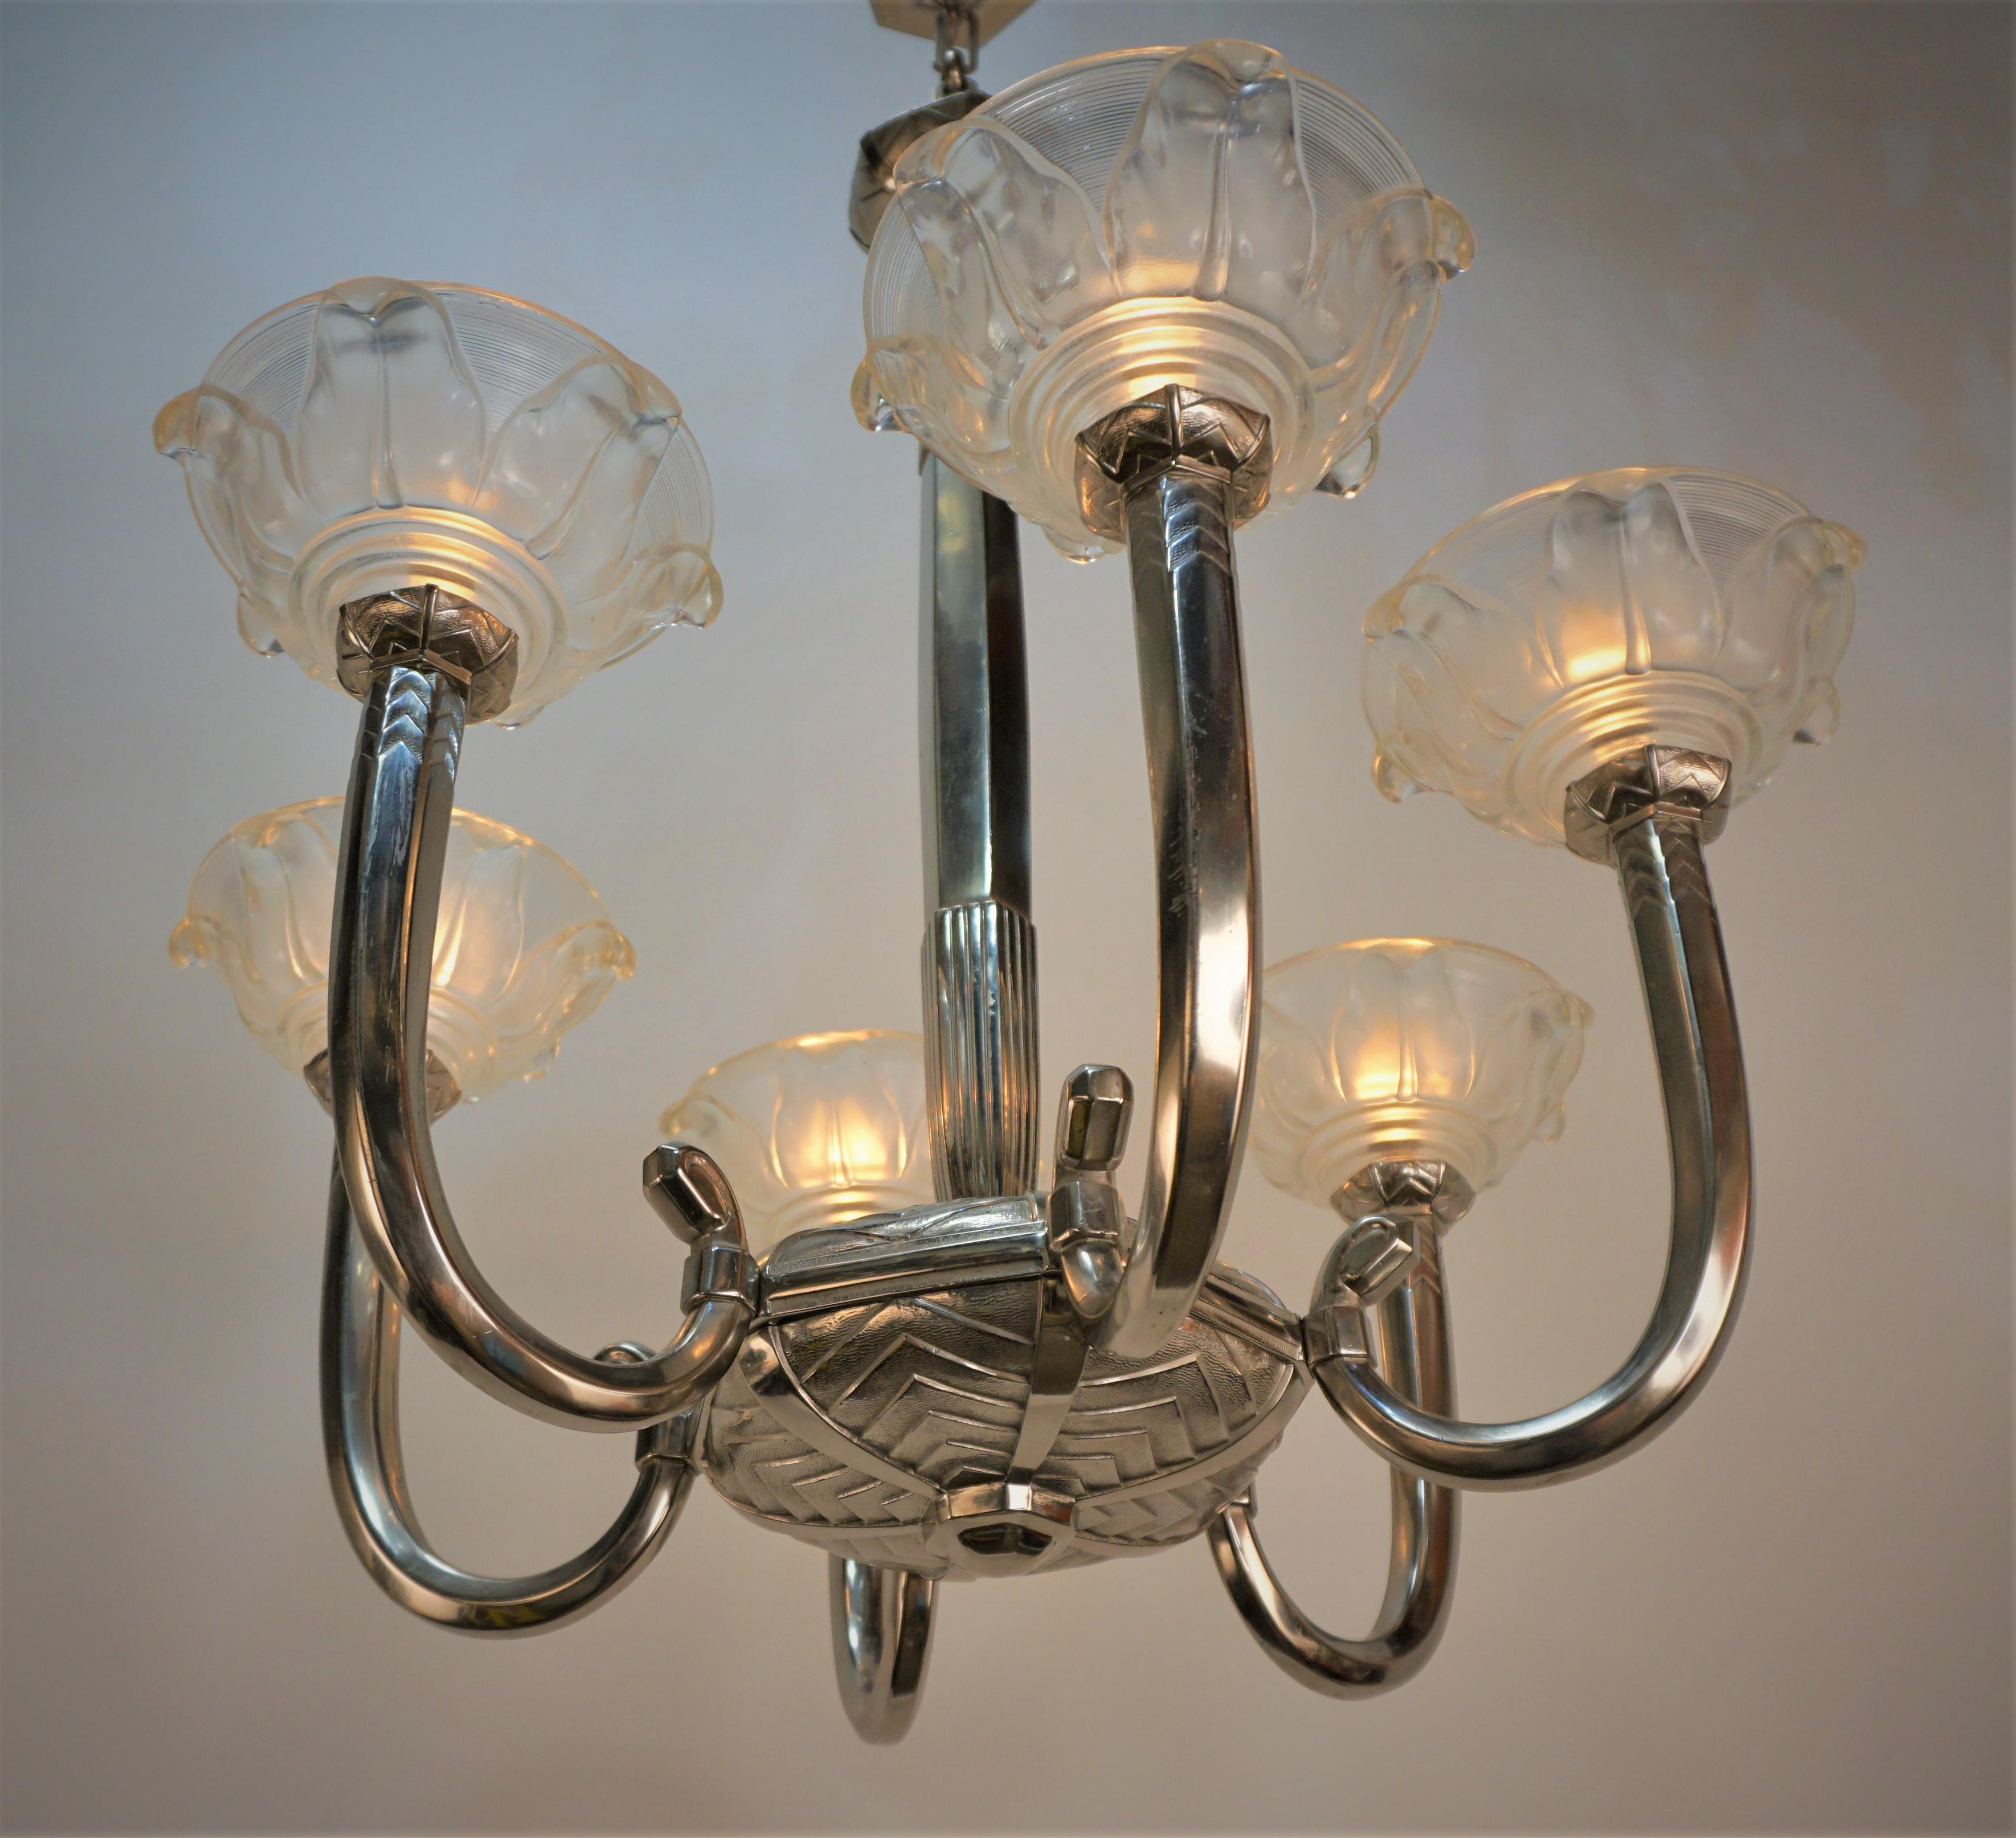 French 1930s Art Deco Sis Arm Chandelier In Good Condition For Sale In Fairfax, VA